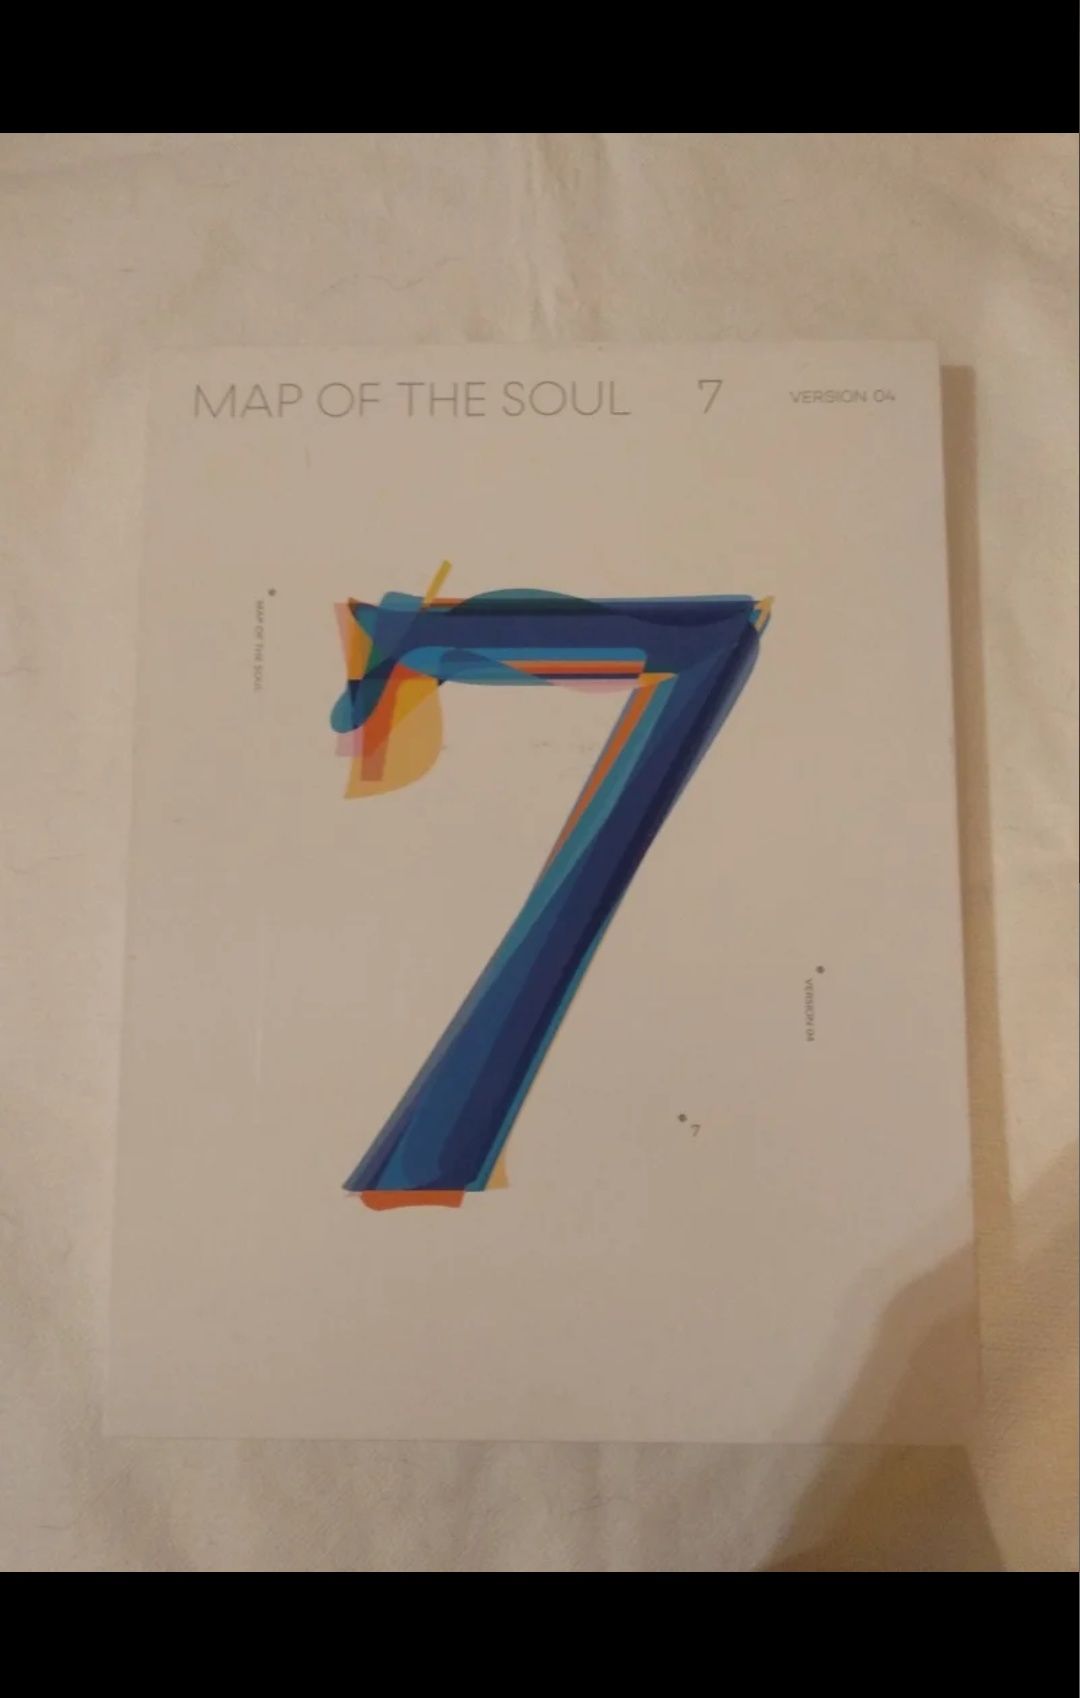 BTS "Map of the Soul - 7, version 04